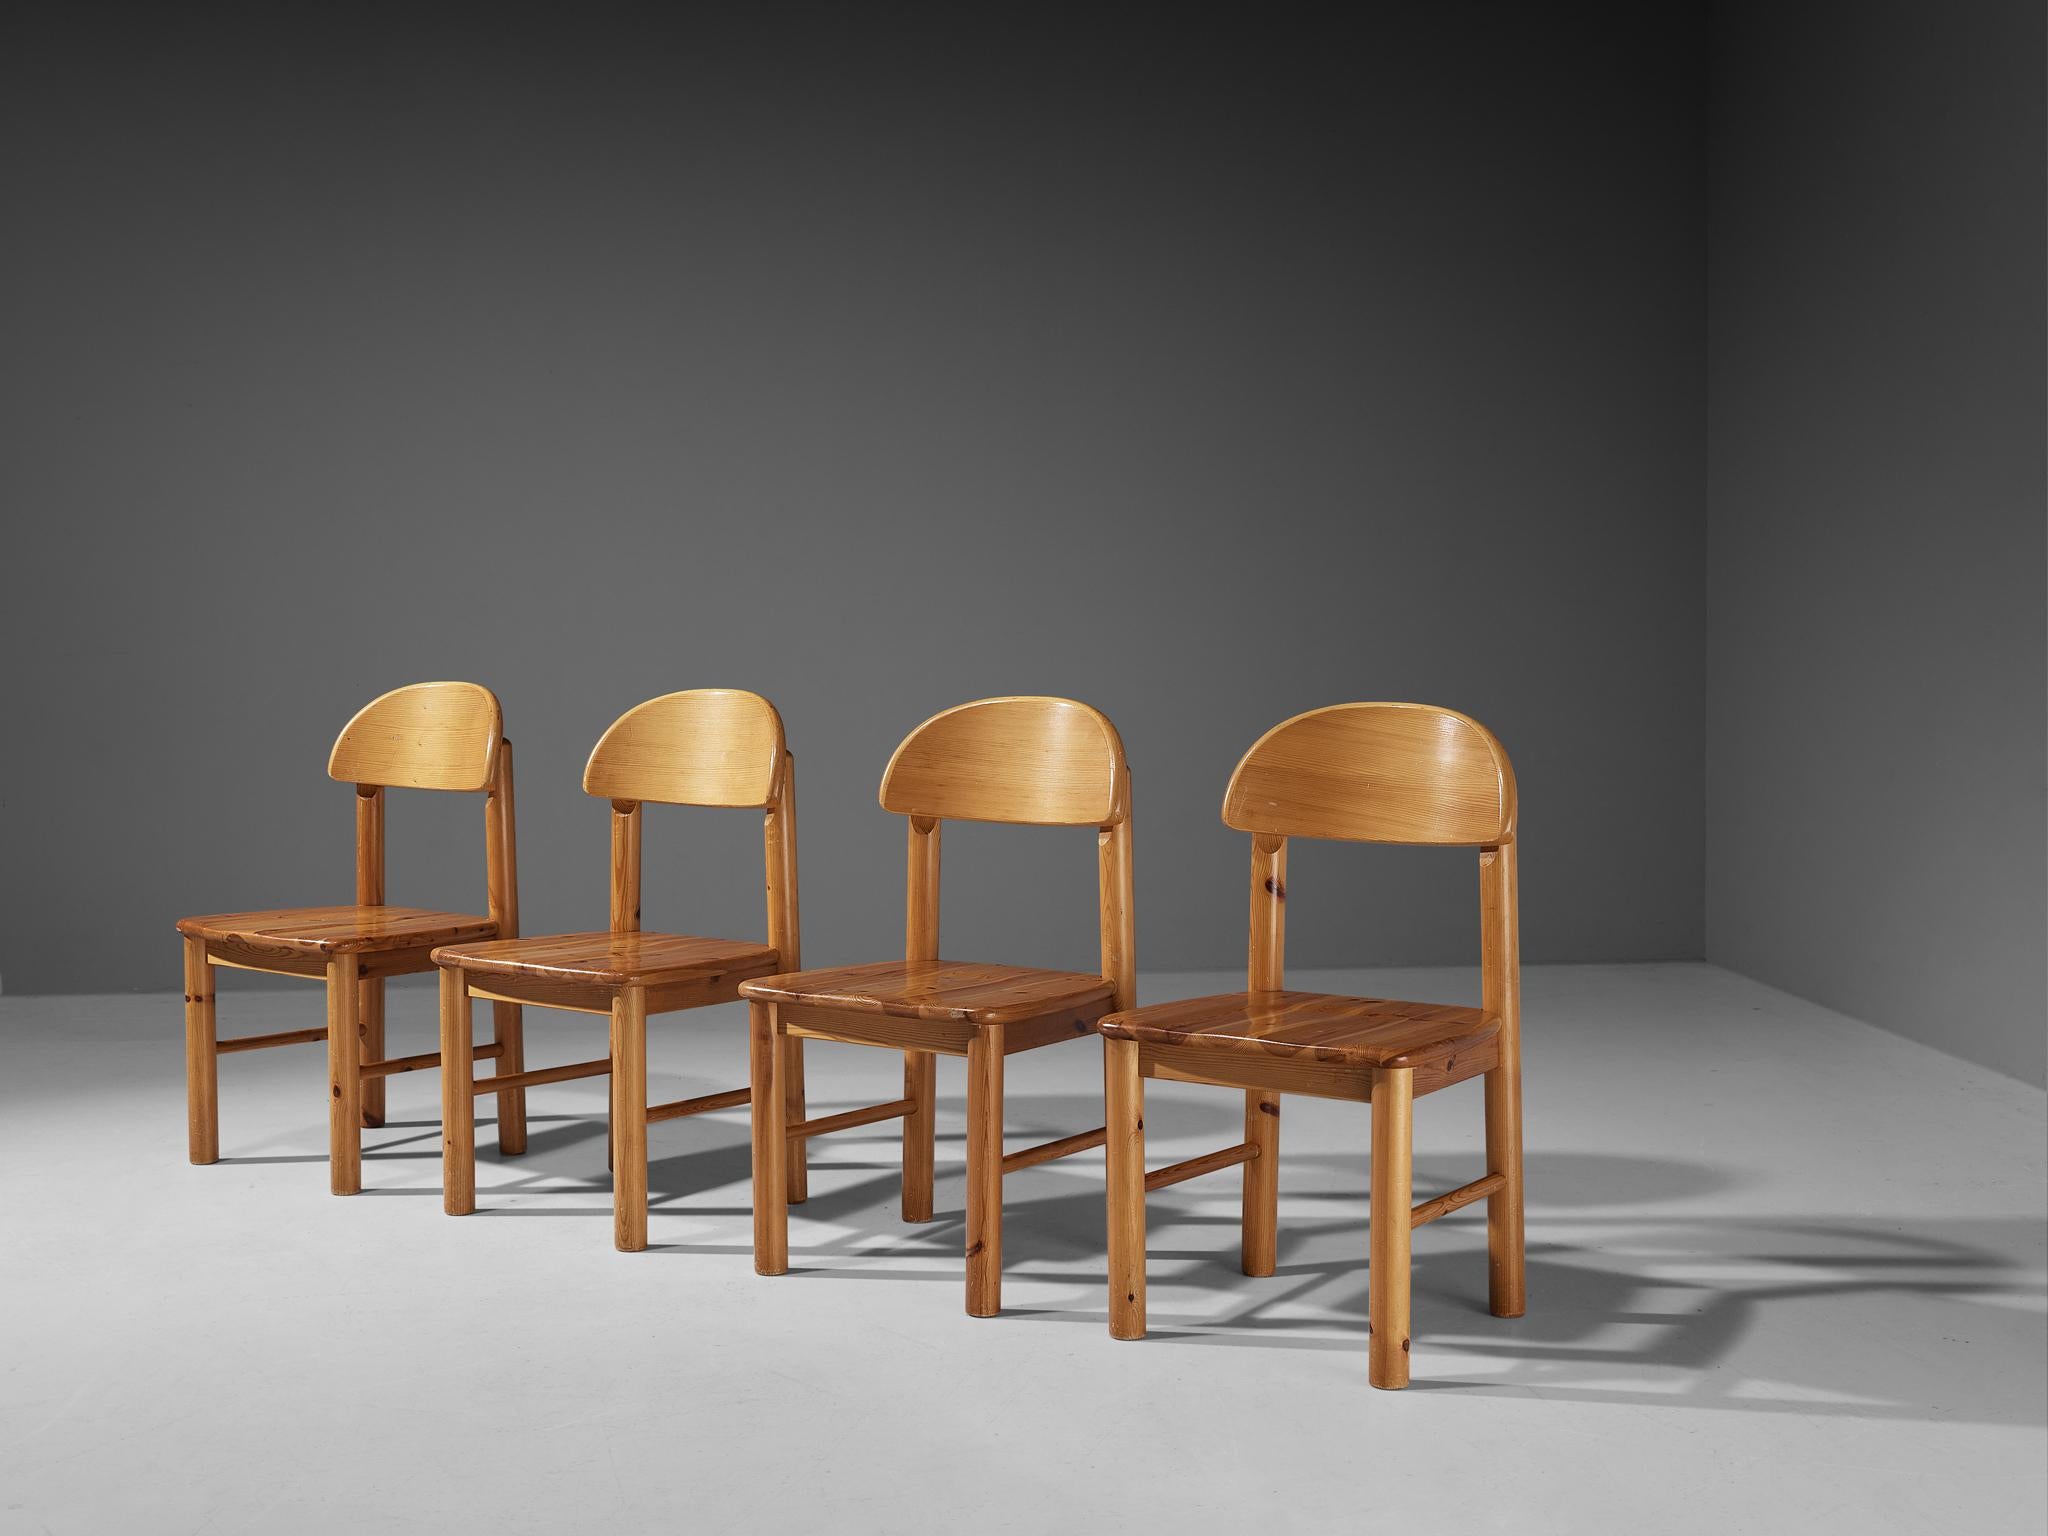 Rainer Daumiller for Hirtshals Sawmill, set of four dining chairs, pine, Denmark, 1970s

Beautiful, organic and natural dining chairs in solid pine designed by Rainer Daumiller. A simplistic design with a round seating and attention for the natural